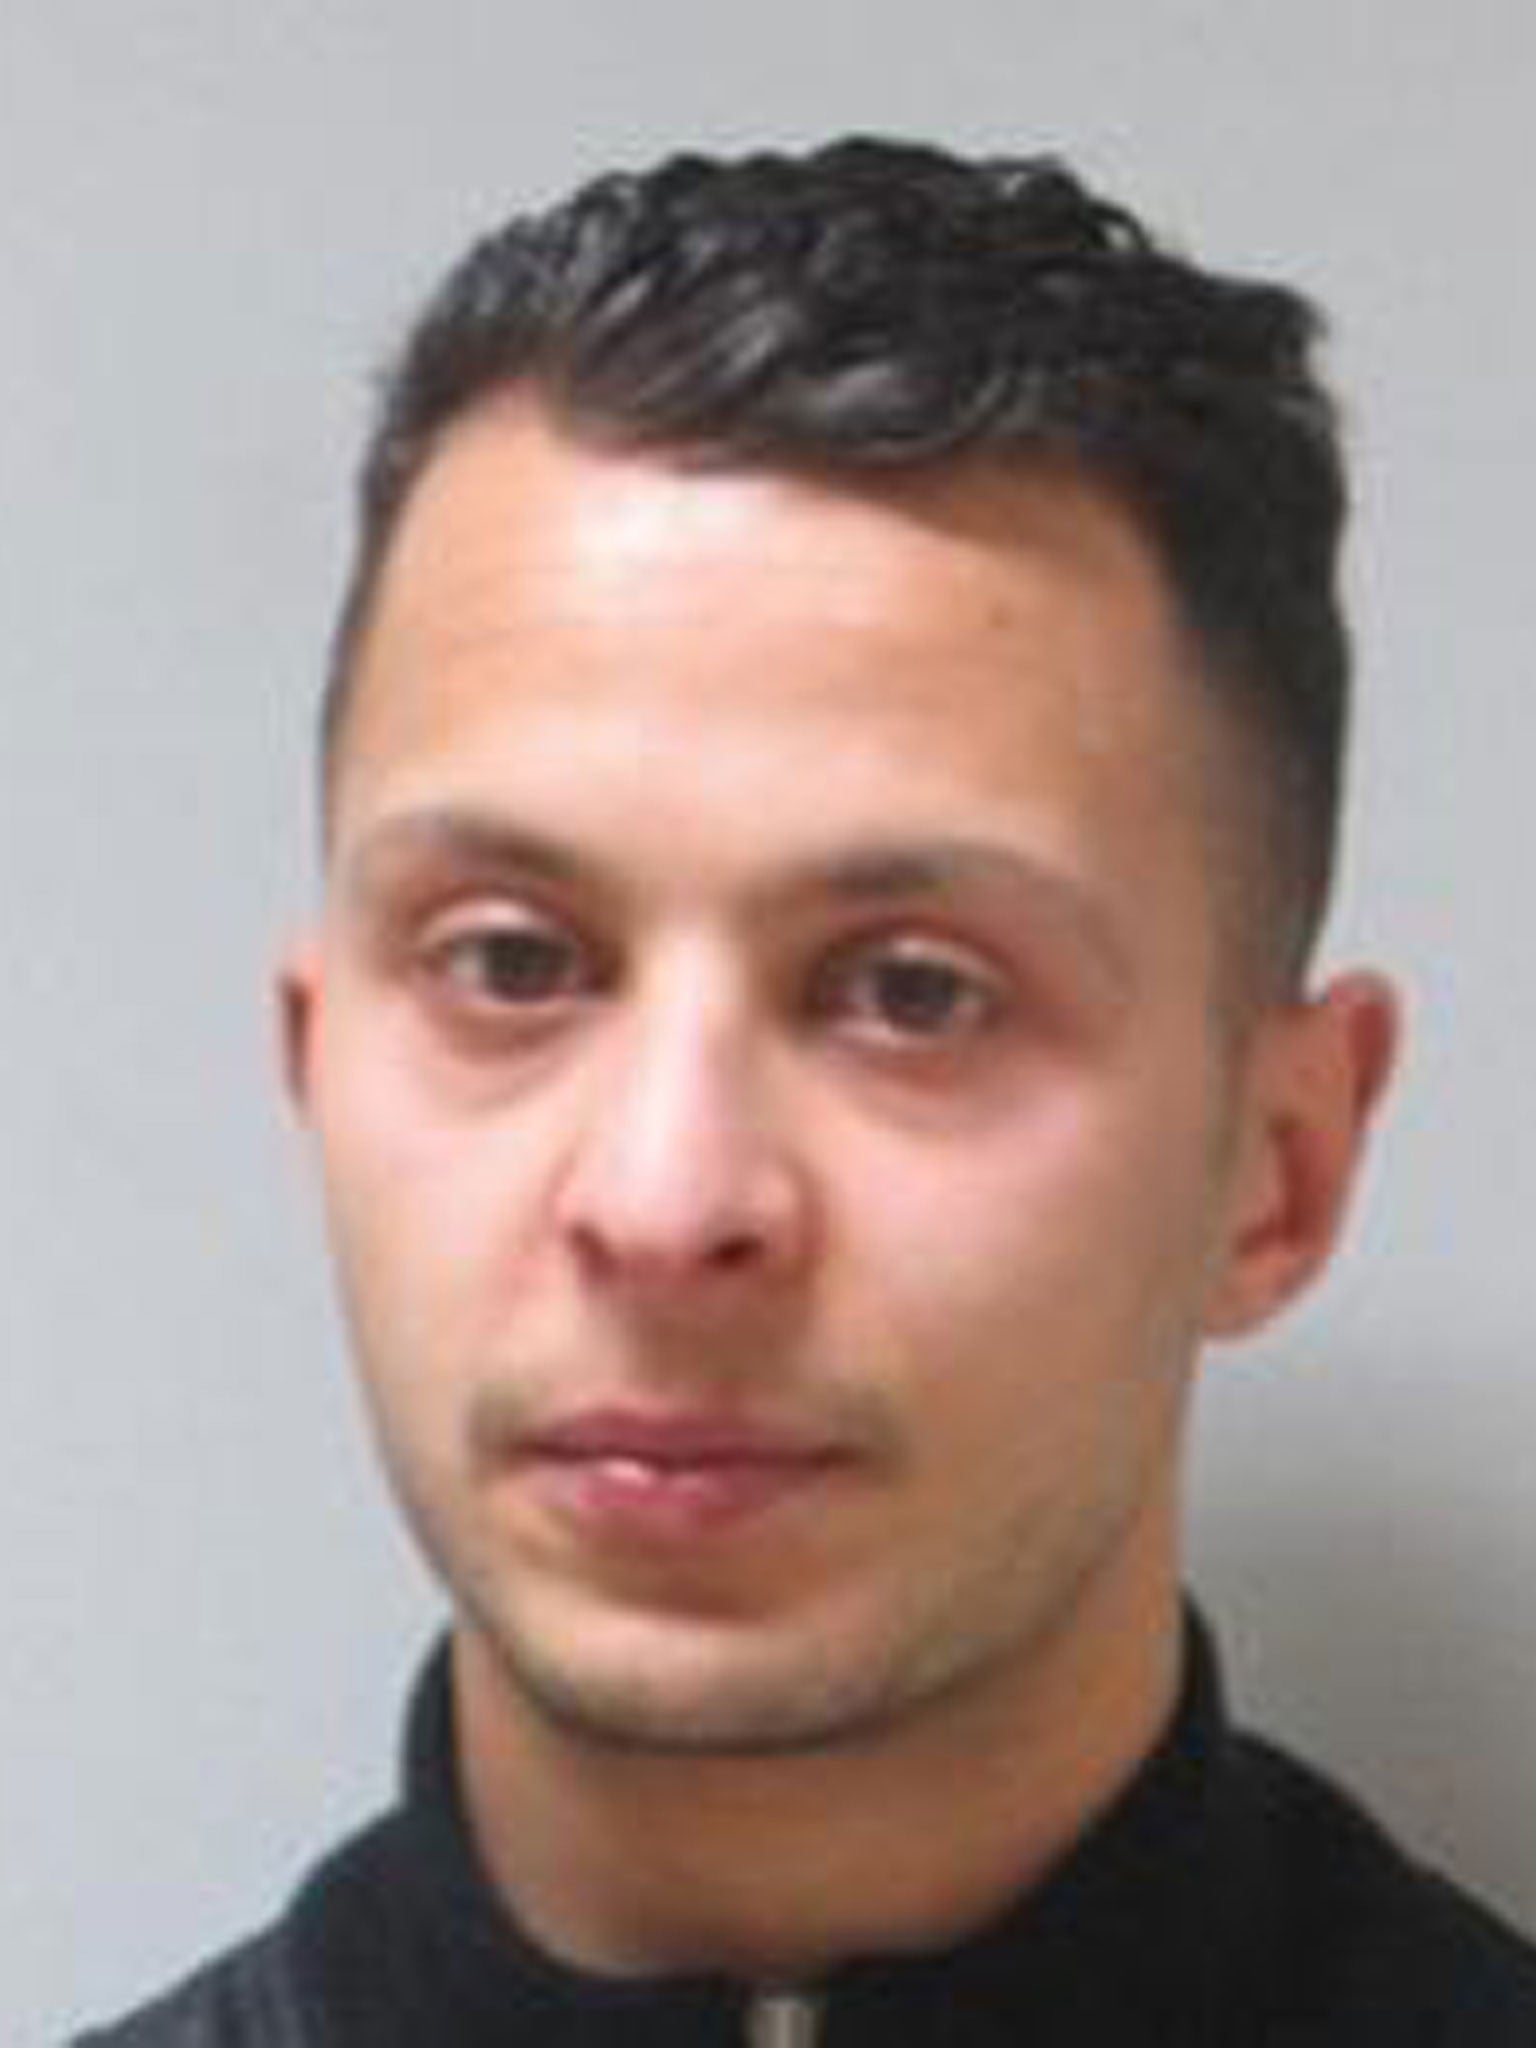 Salah Abdeslam is still on the run after disappearing the day after the Paris attacks